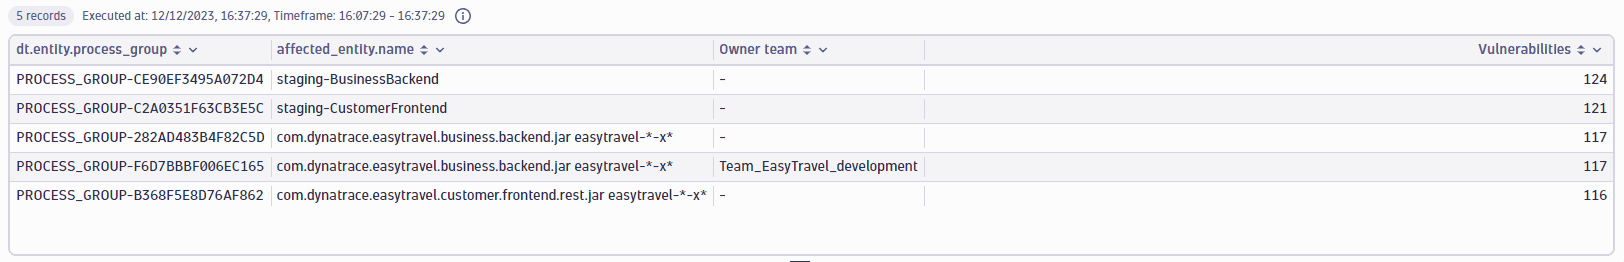 Top 5 process groups with owner teams